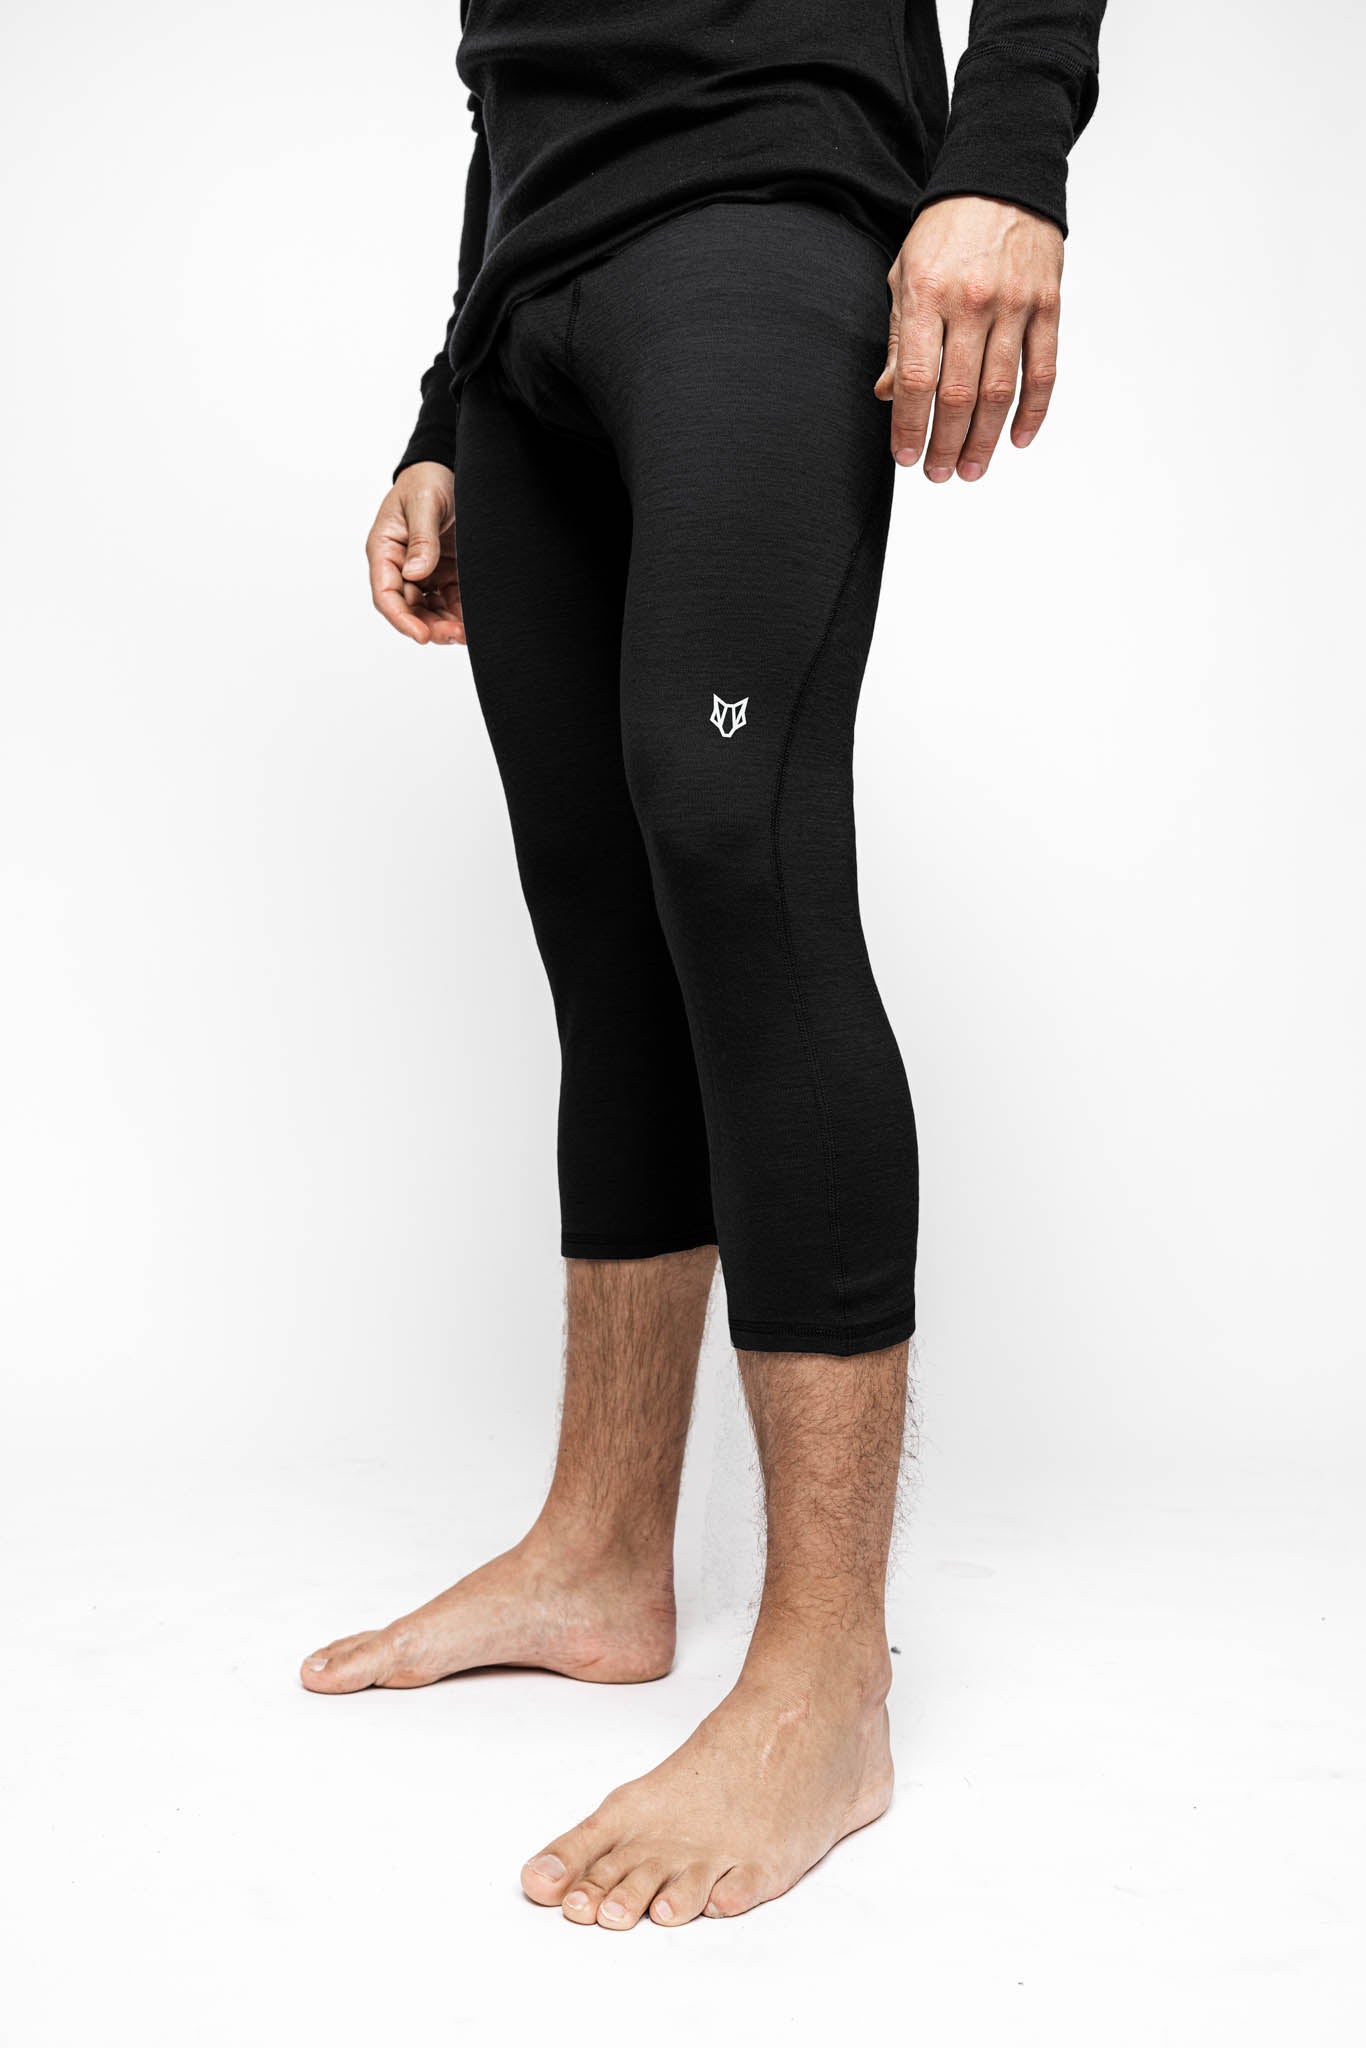 THERMOWAVE - MERINO 3 IN 1 / Merino Wool Thermal Pants for